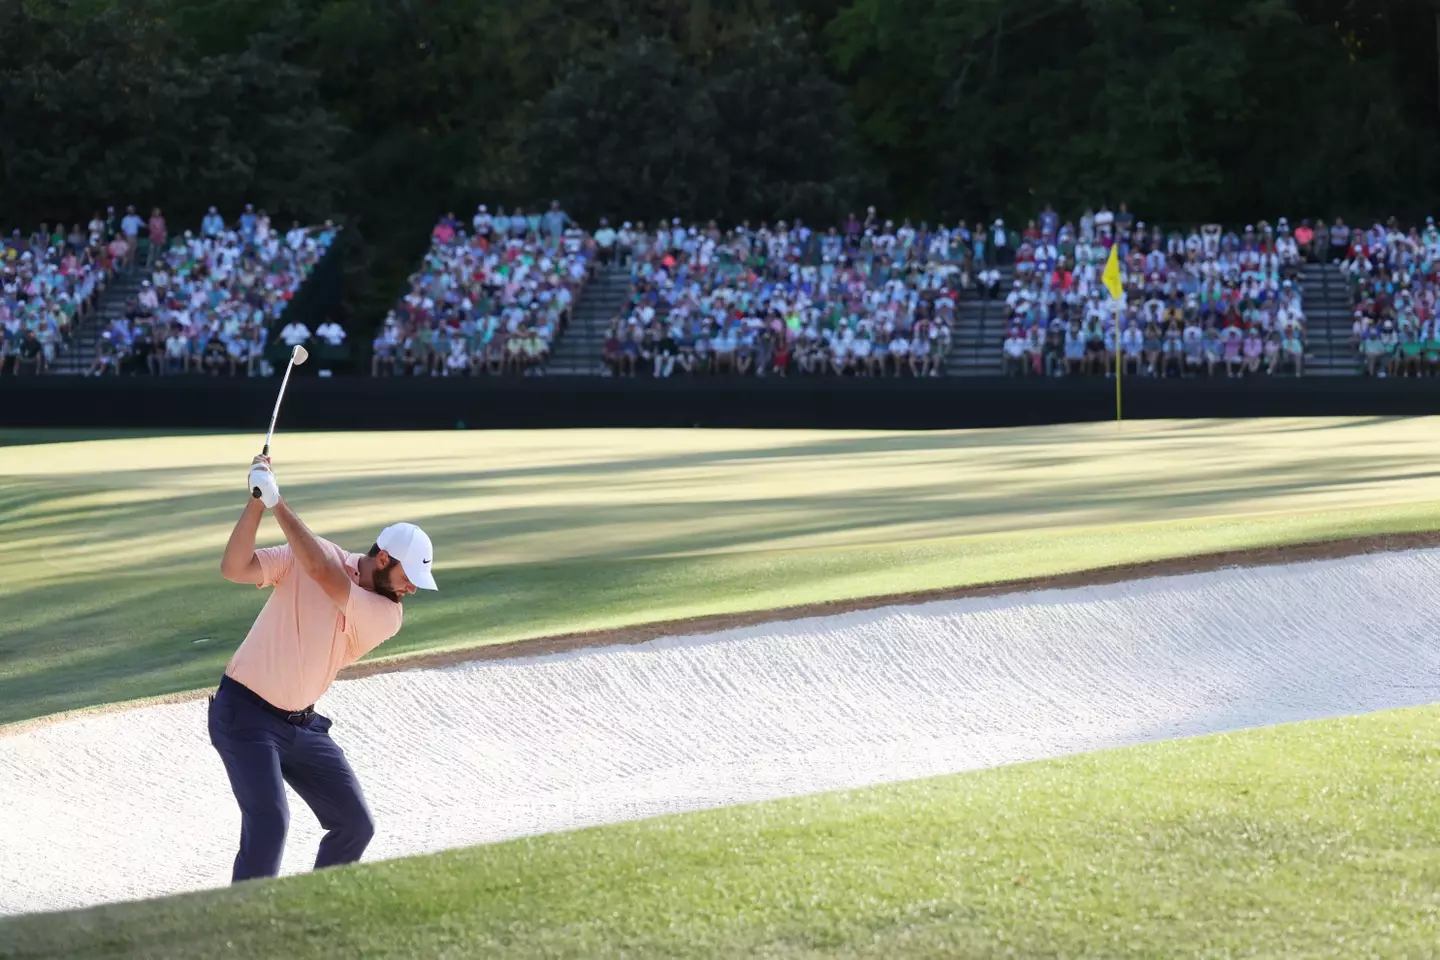 Thousands of golf fans flock to Augusta National Golf Club each year for the Masters Tournament. (Jamie Squire/Getty Images)